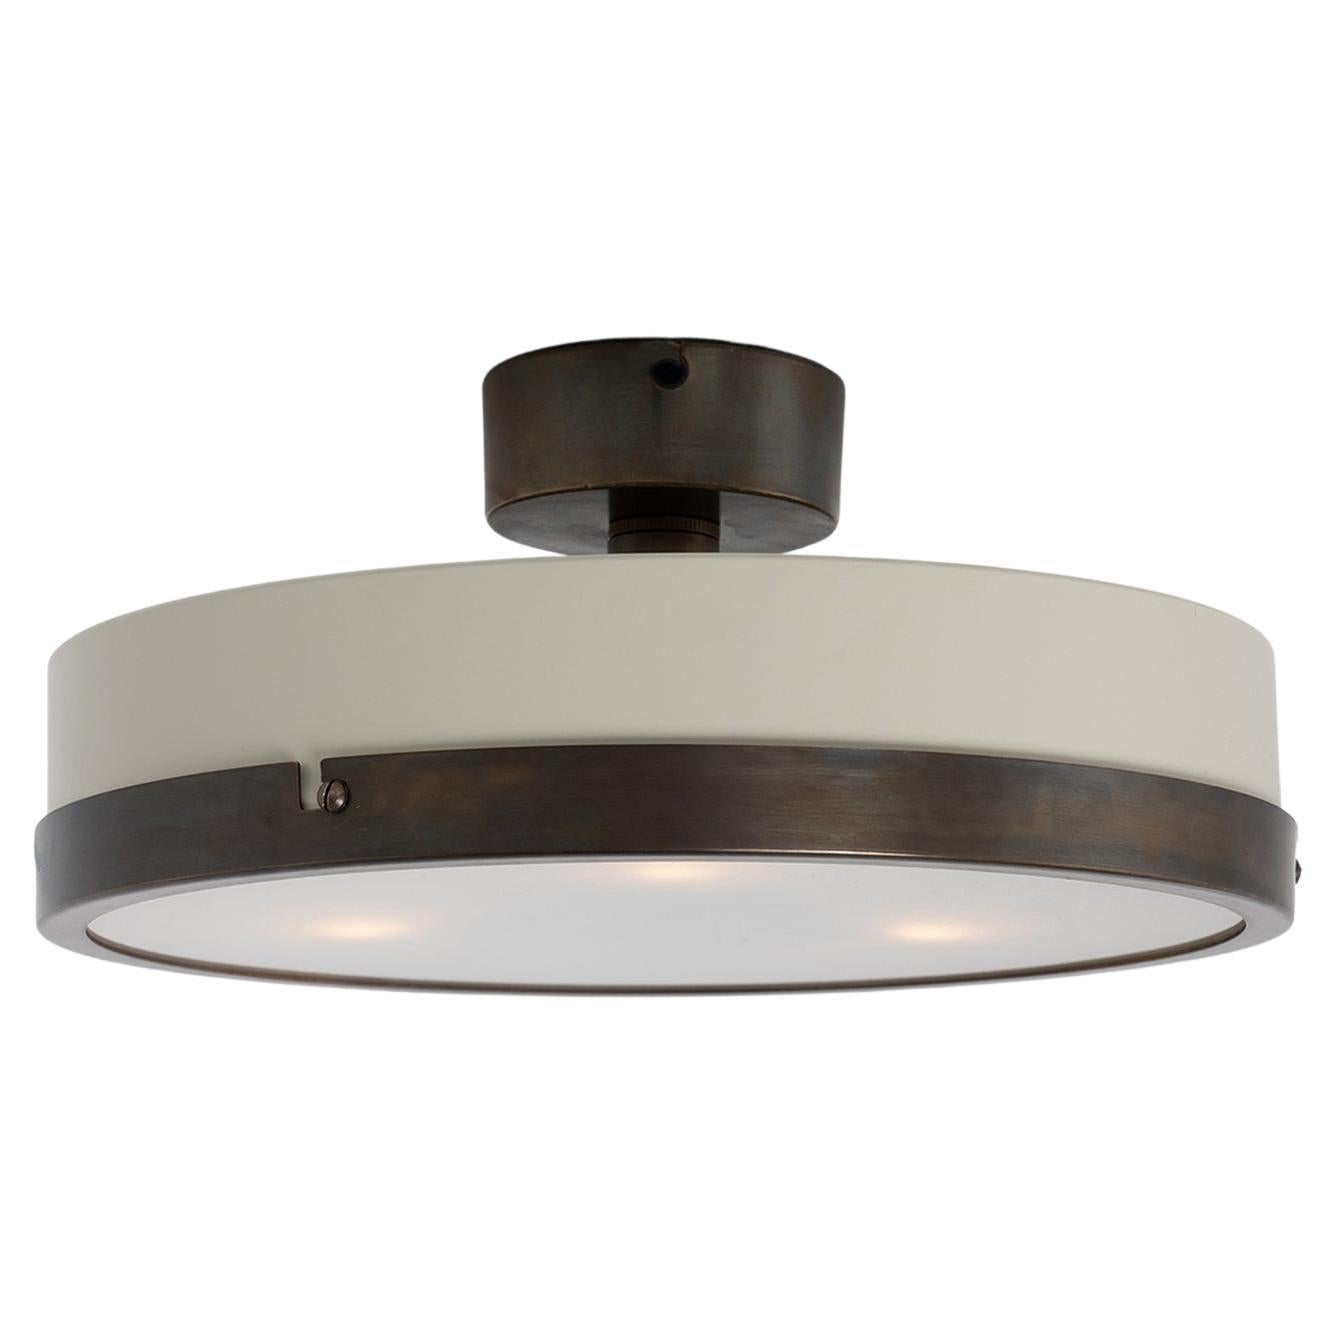 Cream Metal and Satin Glass Ceiling Mount, Made in Italy